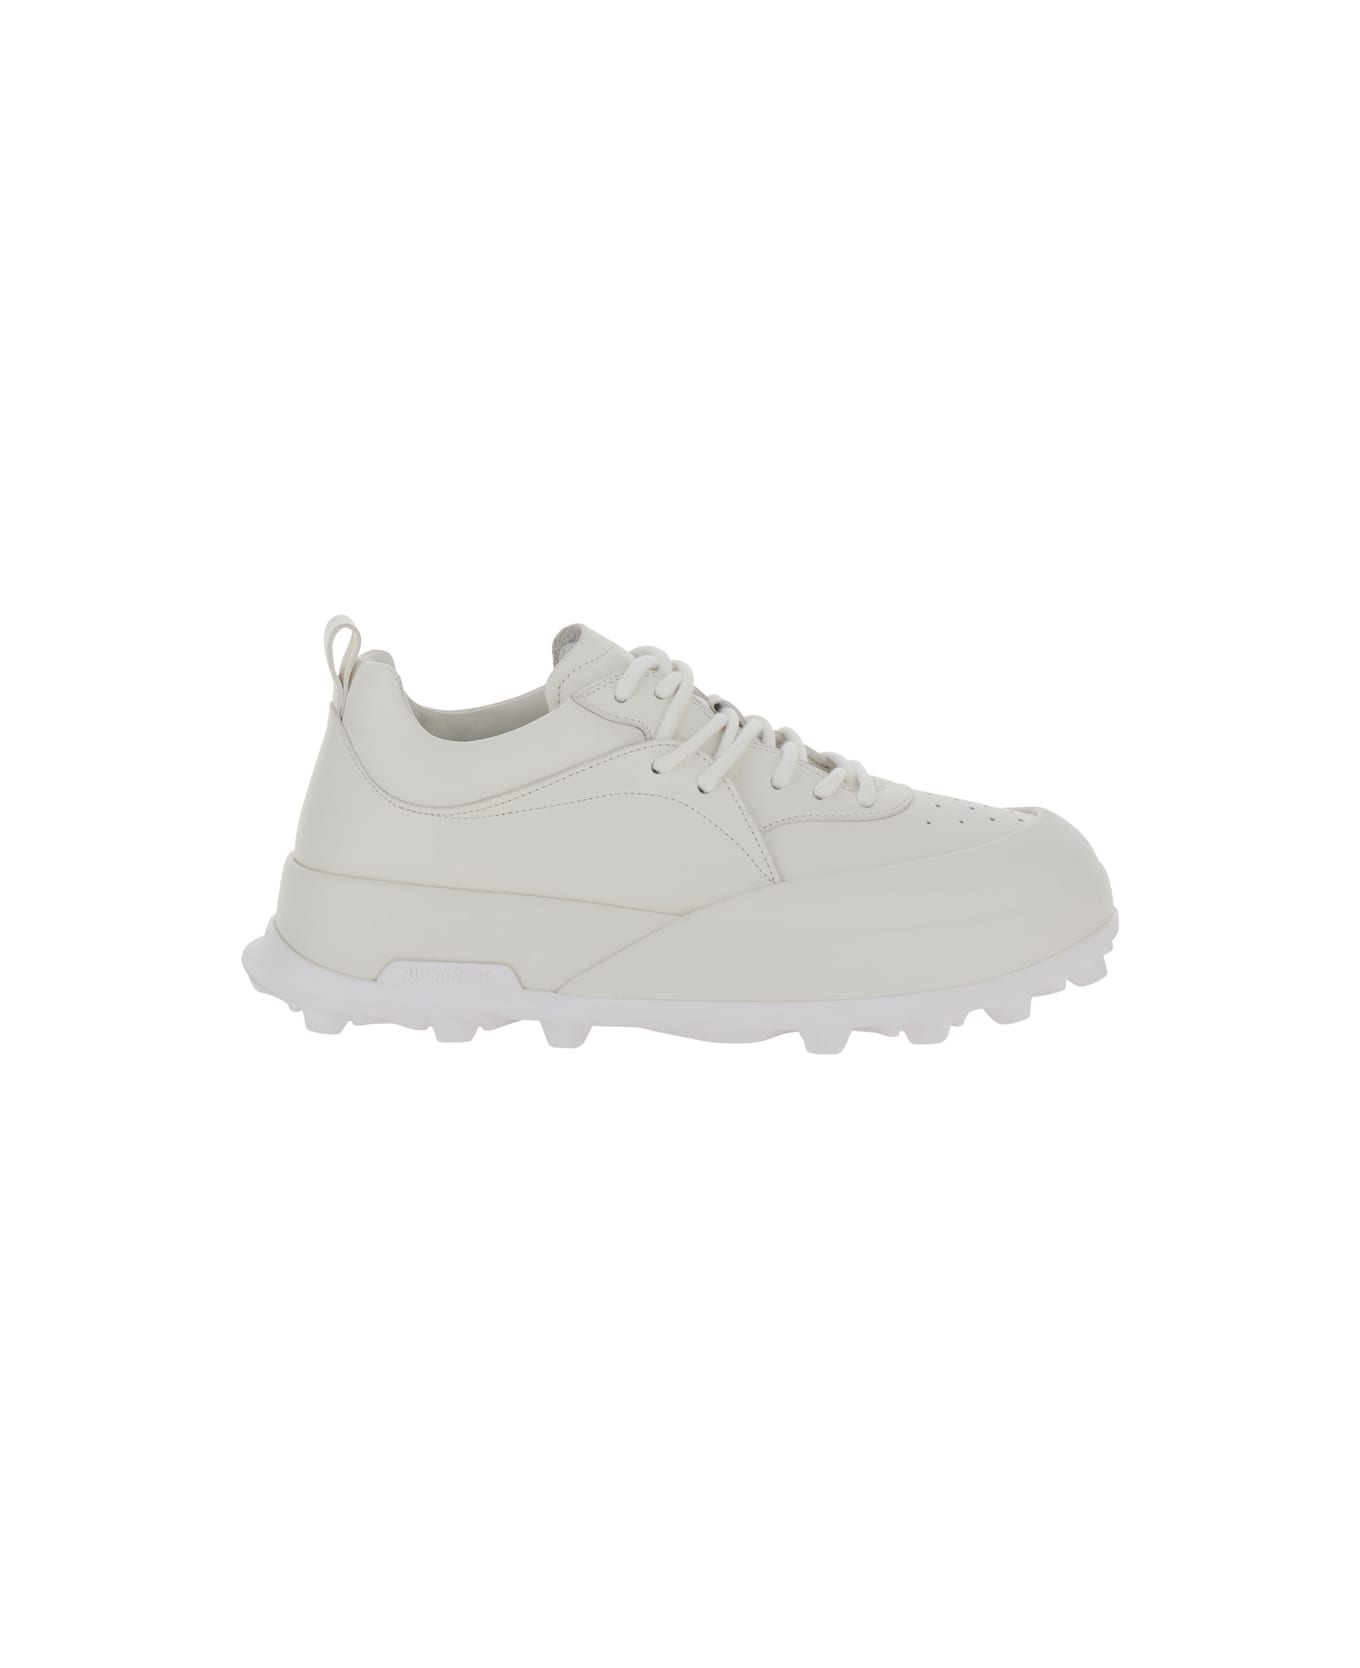 Jil Sander 'orb' White Low Top Sneakers With Cleated Sole In Leather Man - White スニーカー